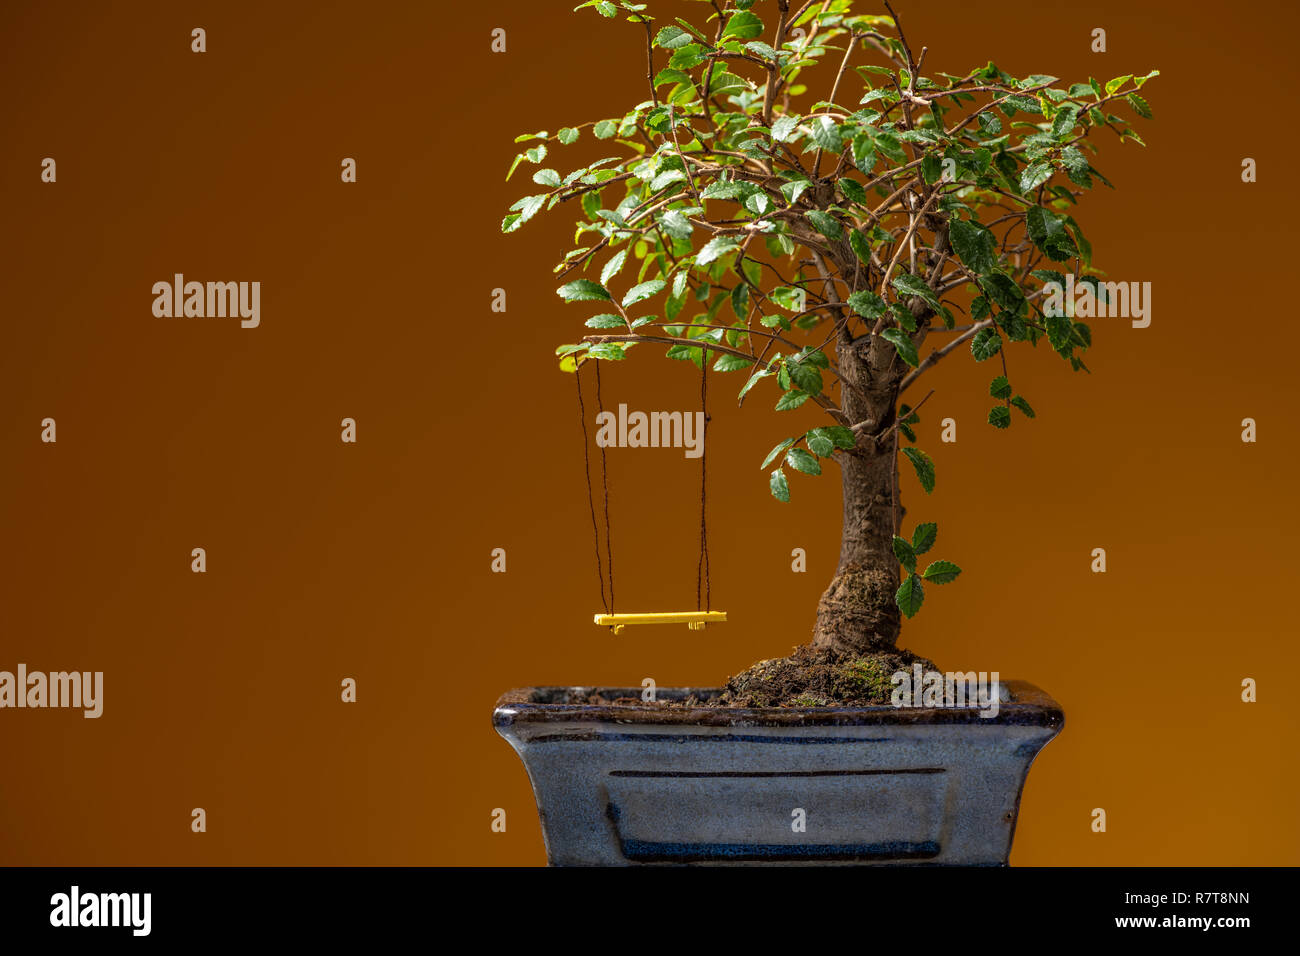 Closeup of a small bonsai tree planted in a black pot, yellow swing Stock Photo